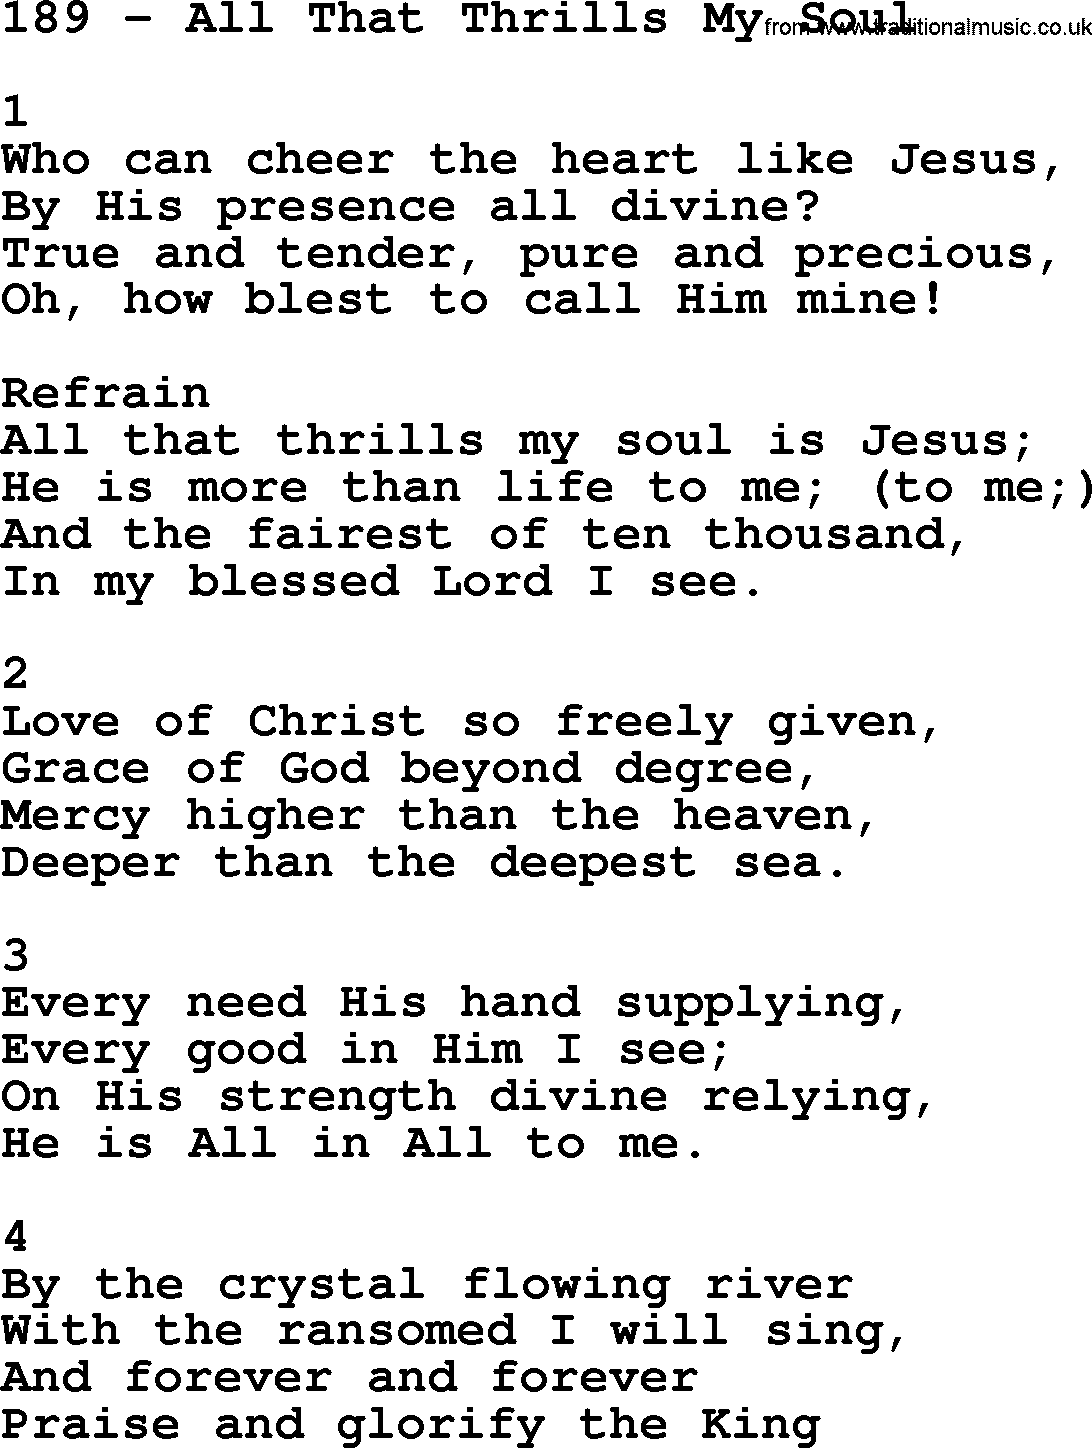 Complete Adventis Hymnal, title: 189-All That Thrills My Soul, with lyrics, midi, mp3, powerpoints(PPT) and PDF,